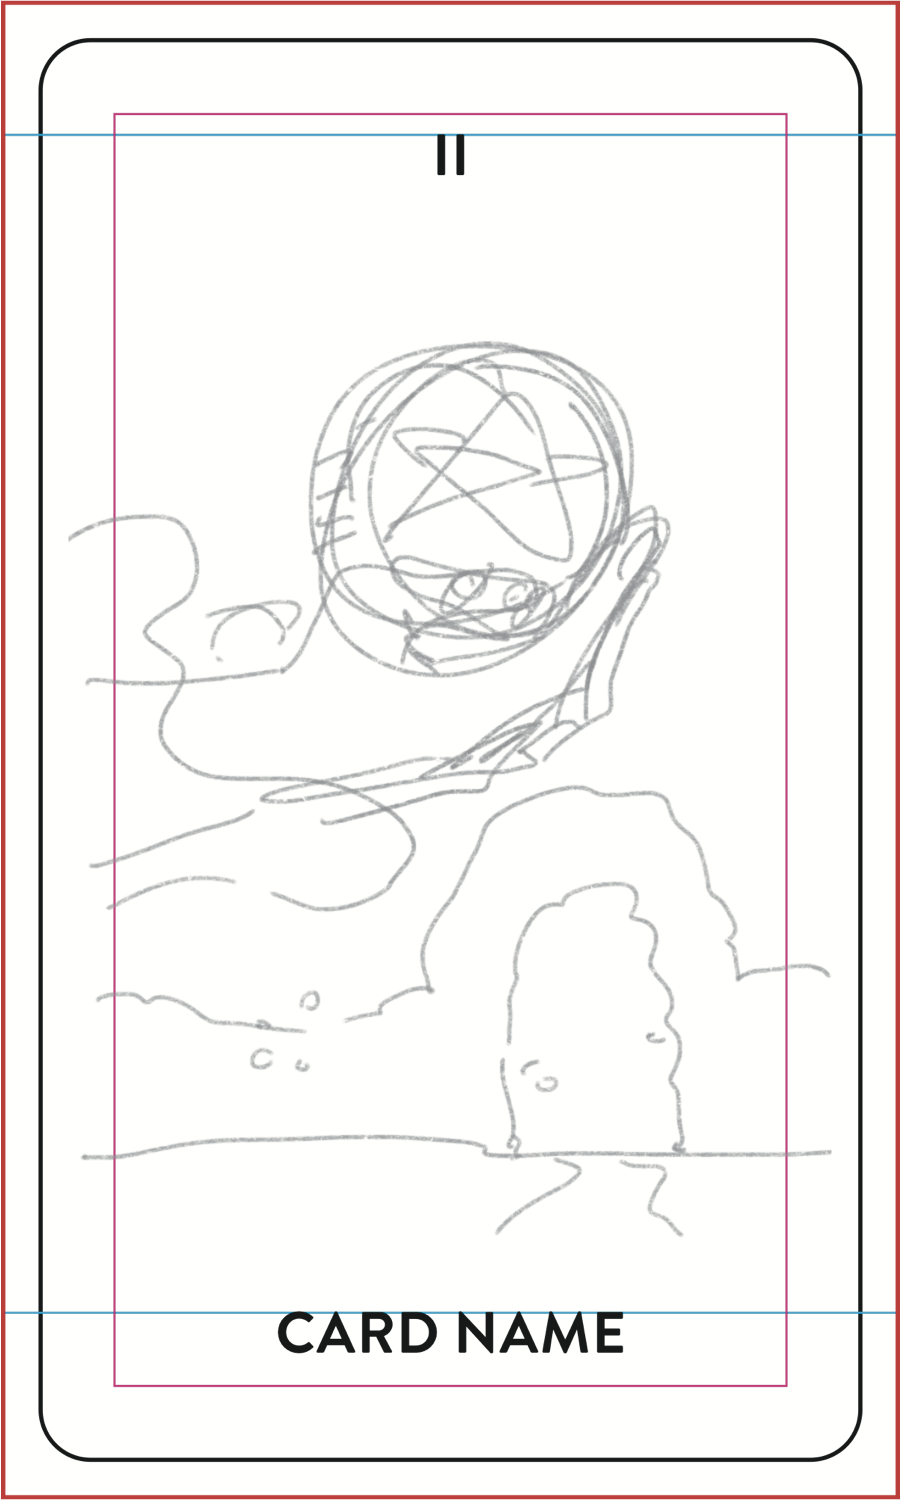 1 ace of pentacles.PNG